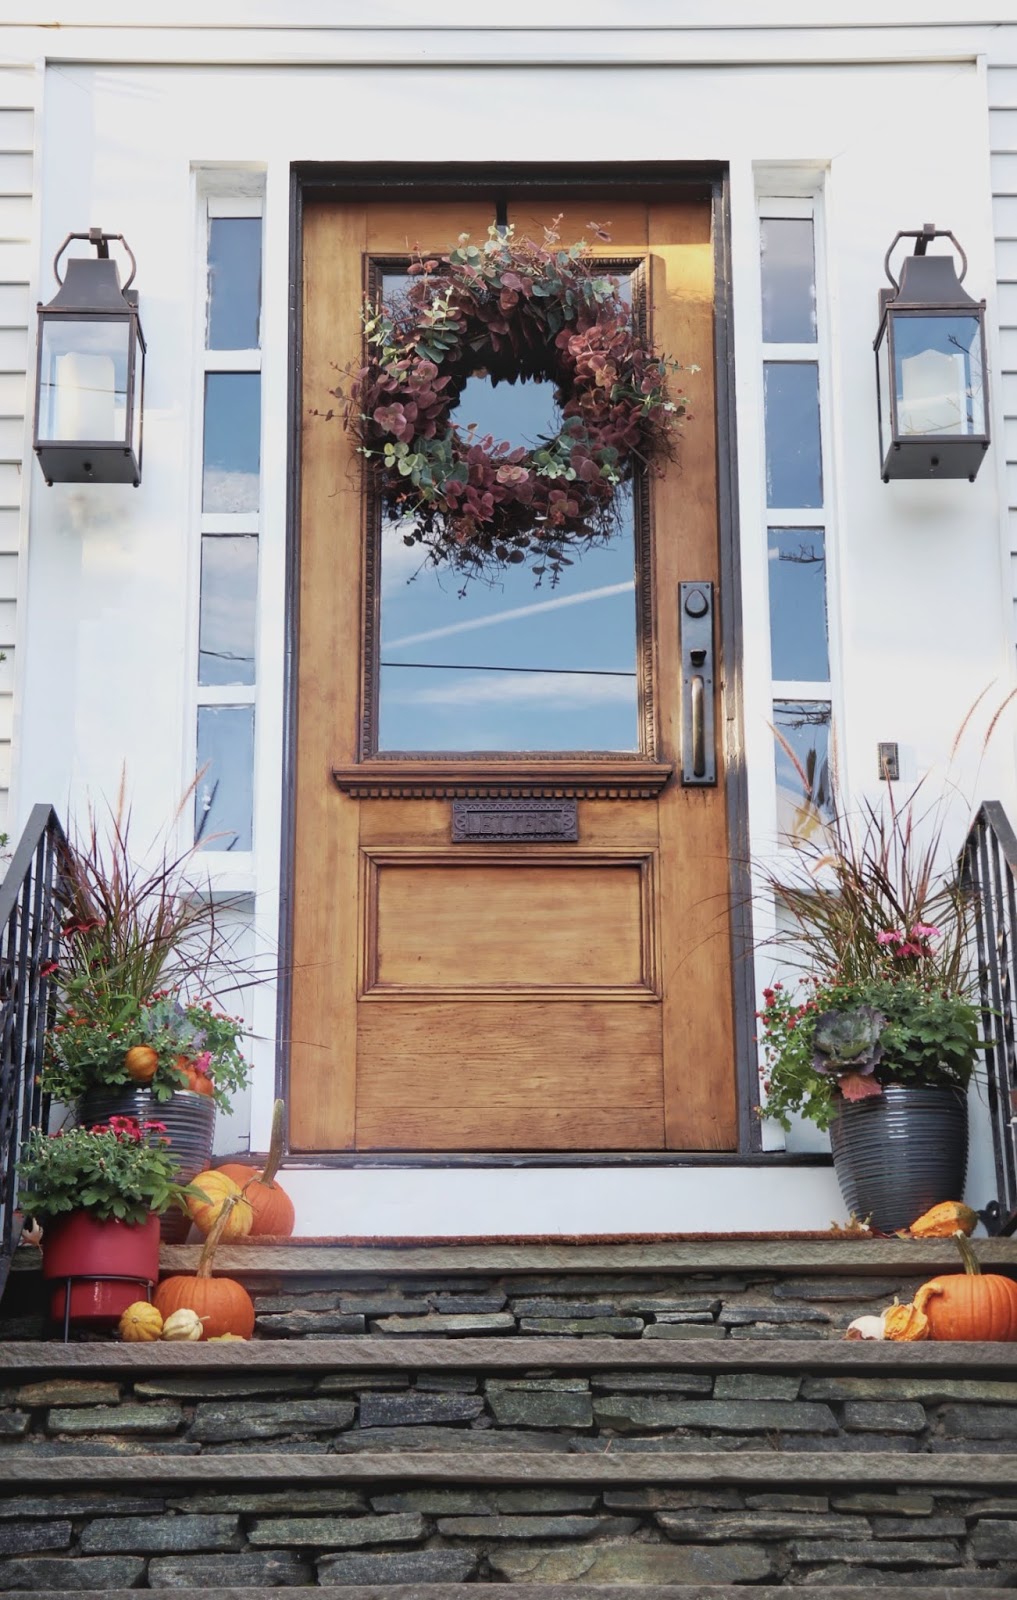 Five Steps to a Fab Fall Front Porch - Made by Carli